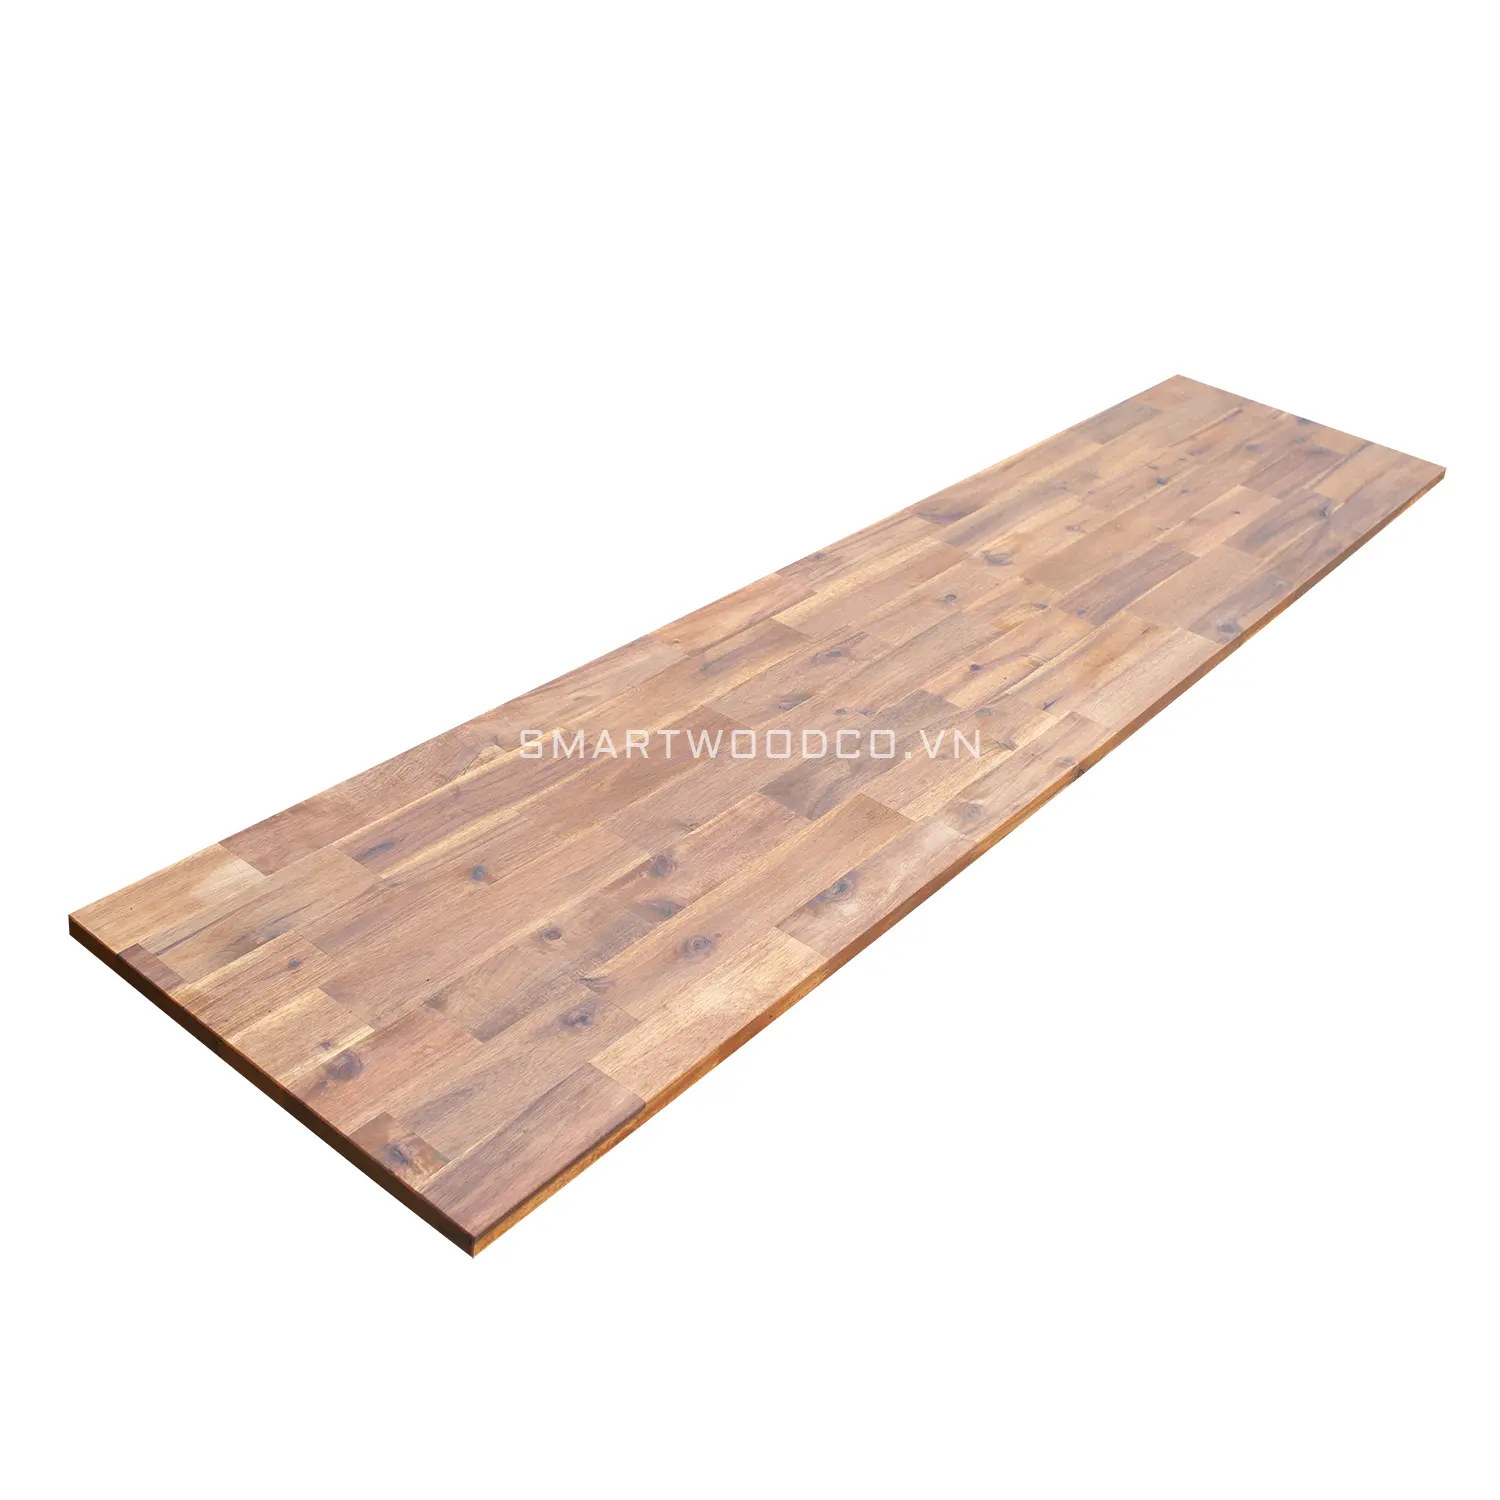 BEST SELLING FACTORY PRICE -  ACACIA/WENGE/RUBBER - FINGER JOINT BOARDS  FROM SMARTWOOD COMPANY